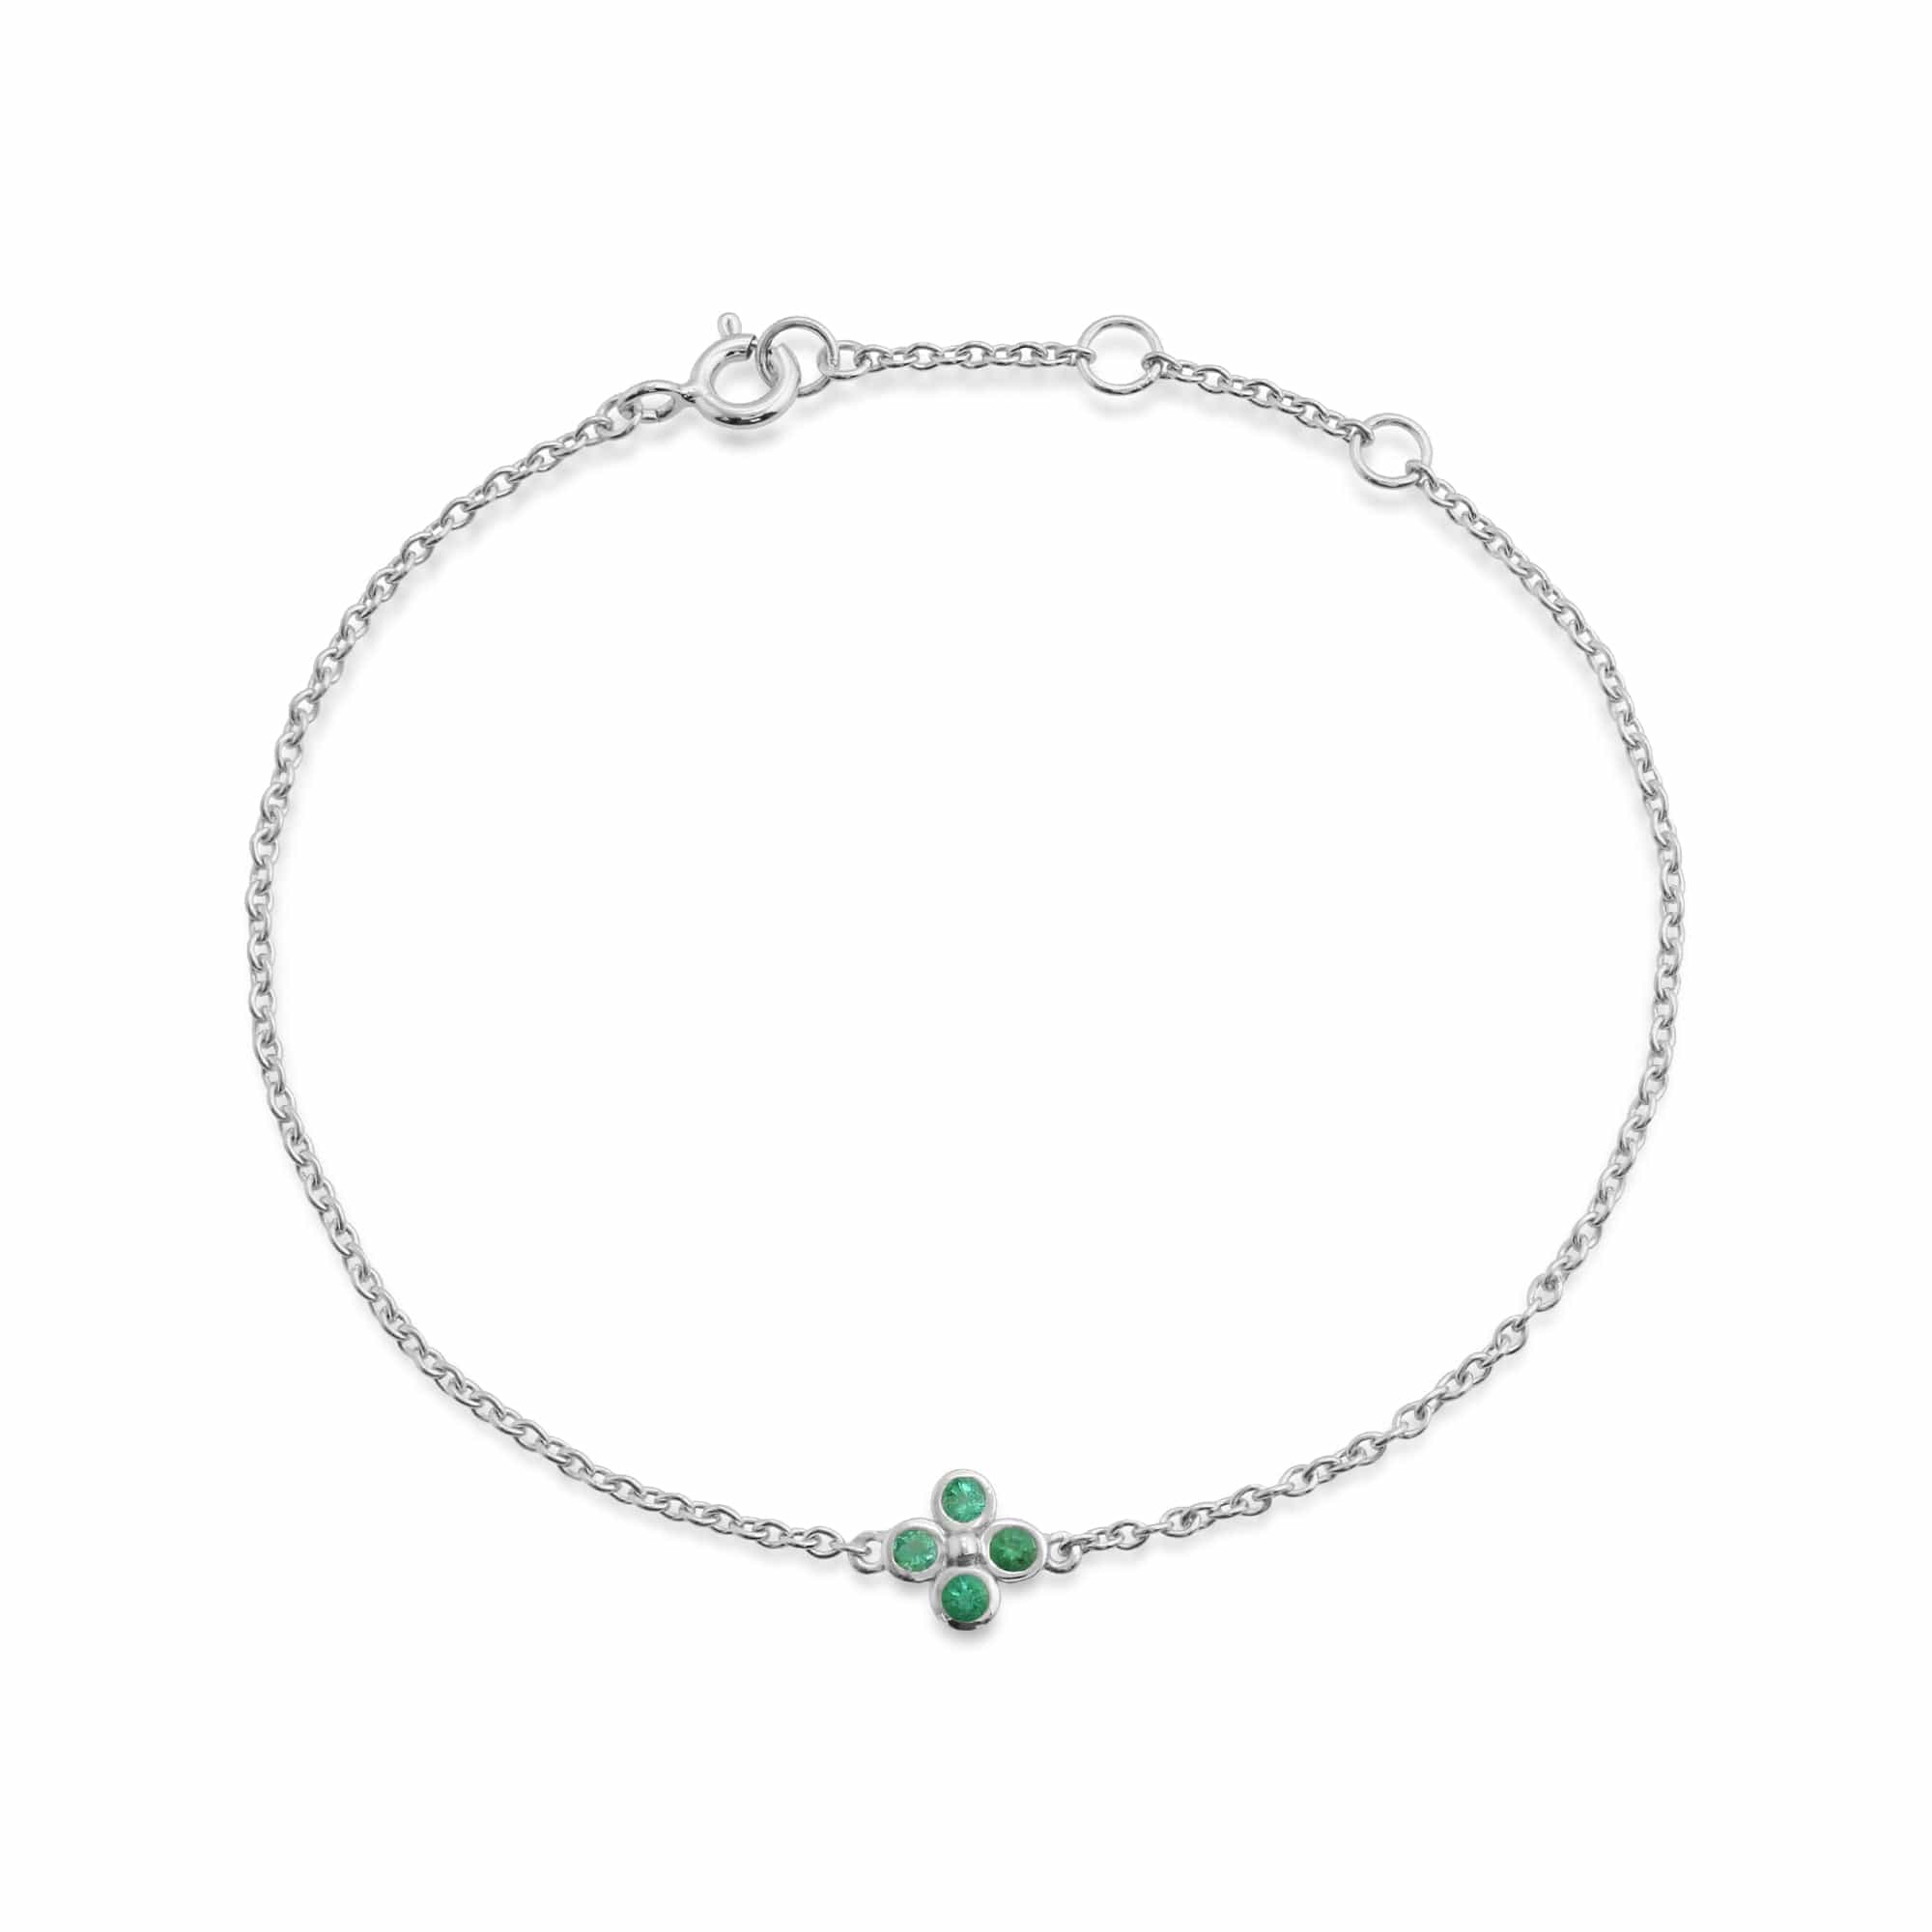 Tiny beaded Emerald bracelet 3mm, silver hematite spaces – Crystal boutique